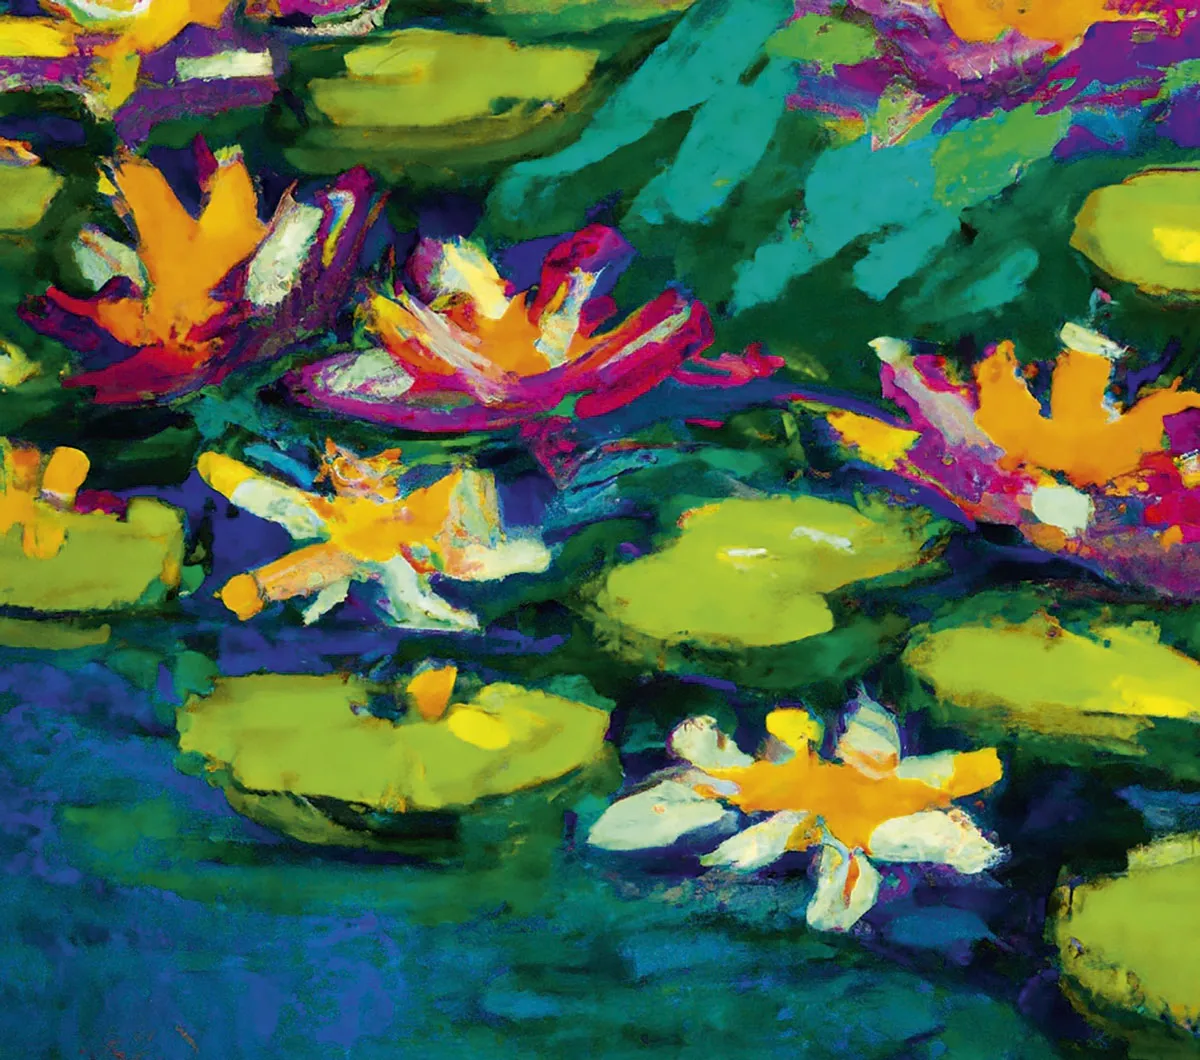 Not quite Monet’s water lilies, but close enough to make the intention clear © Shutterstock